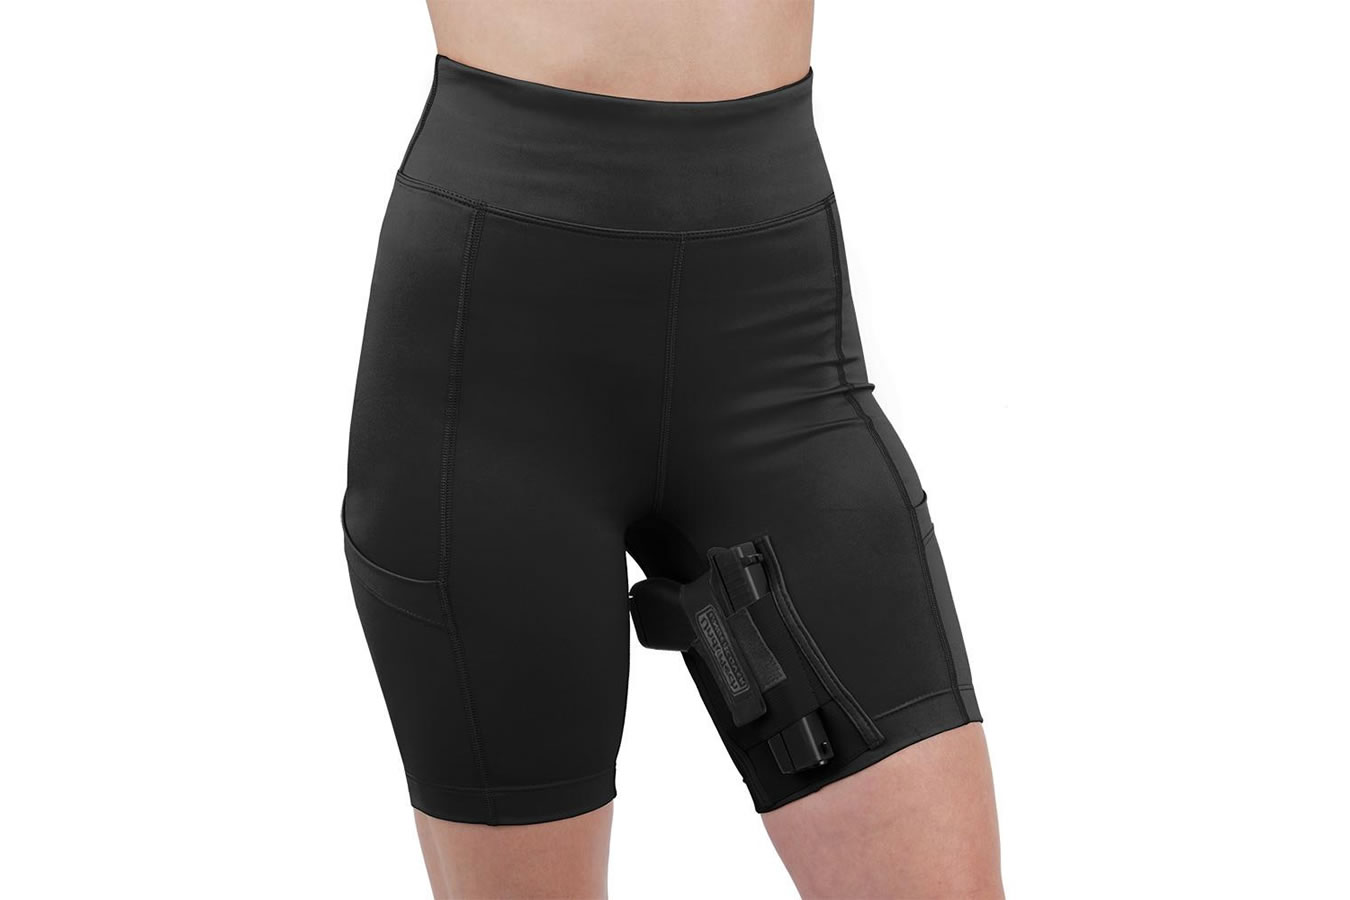 Undertech Undercover Womens Conceal Carry Thigh Holster Short Vance Outdoors 